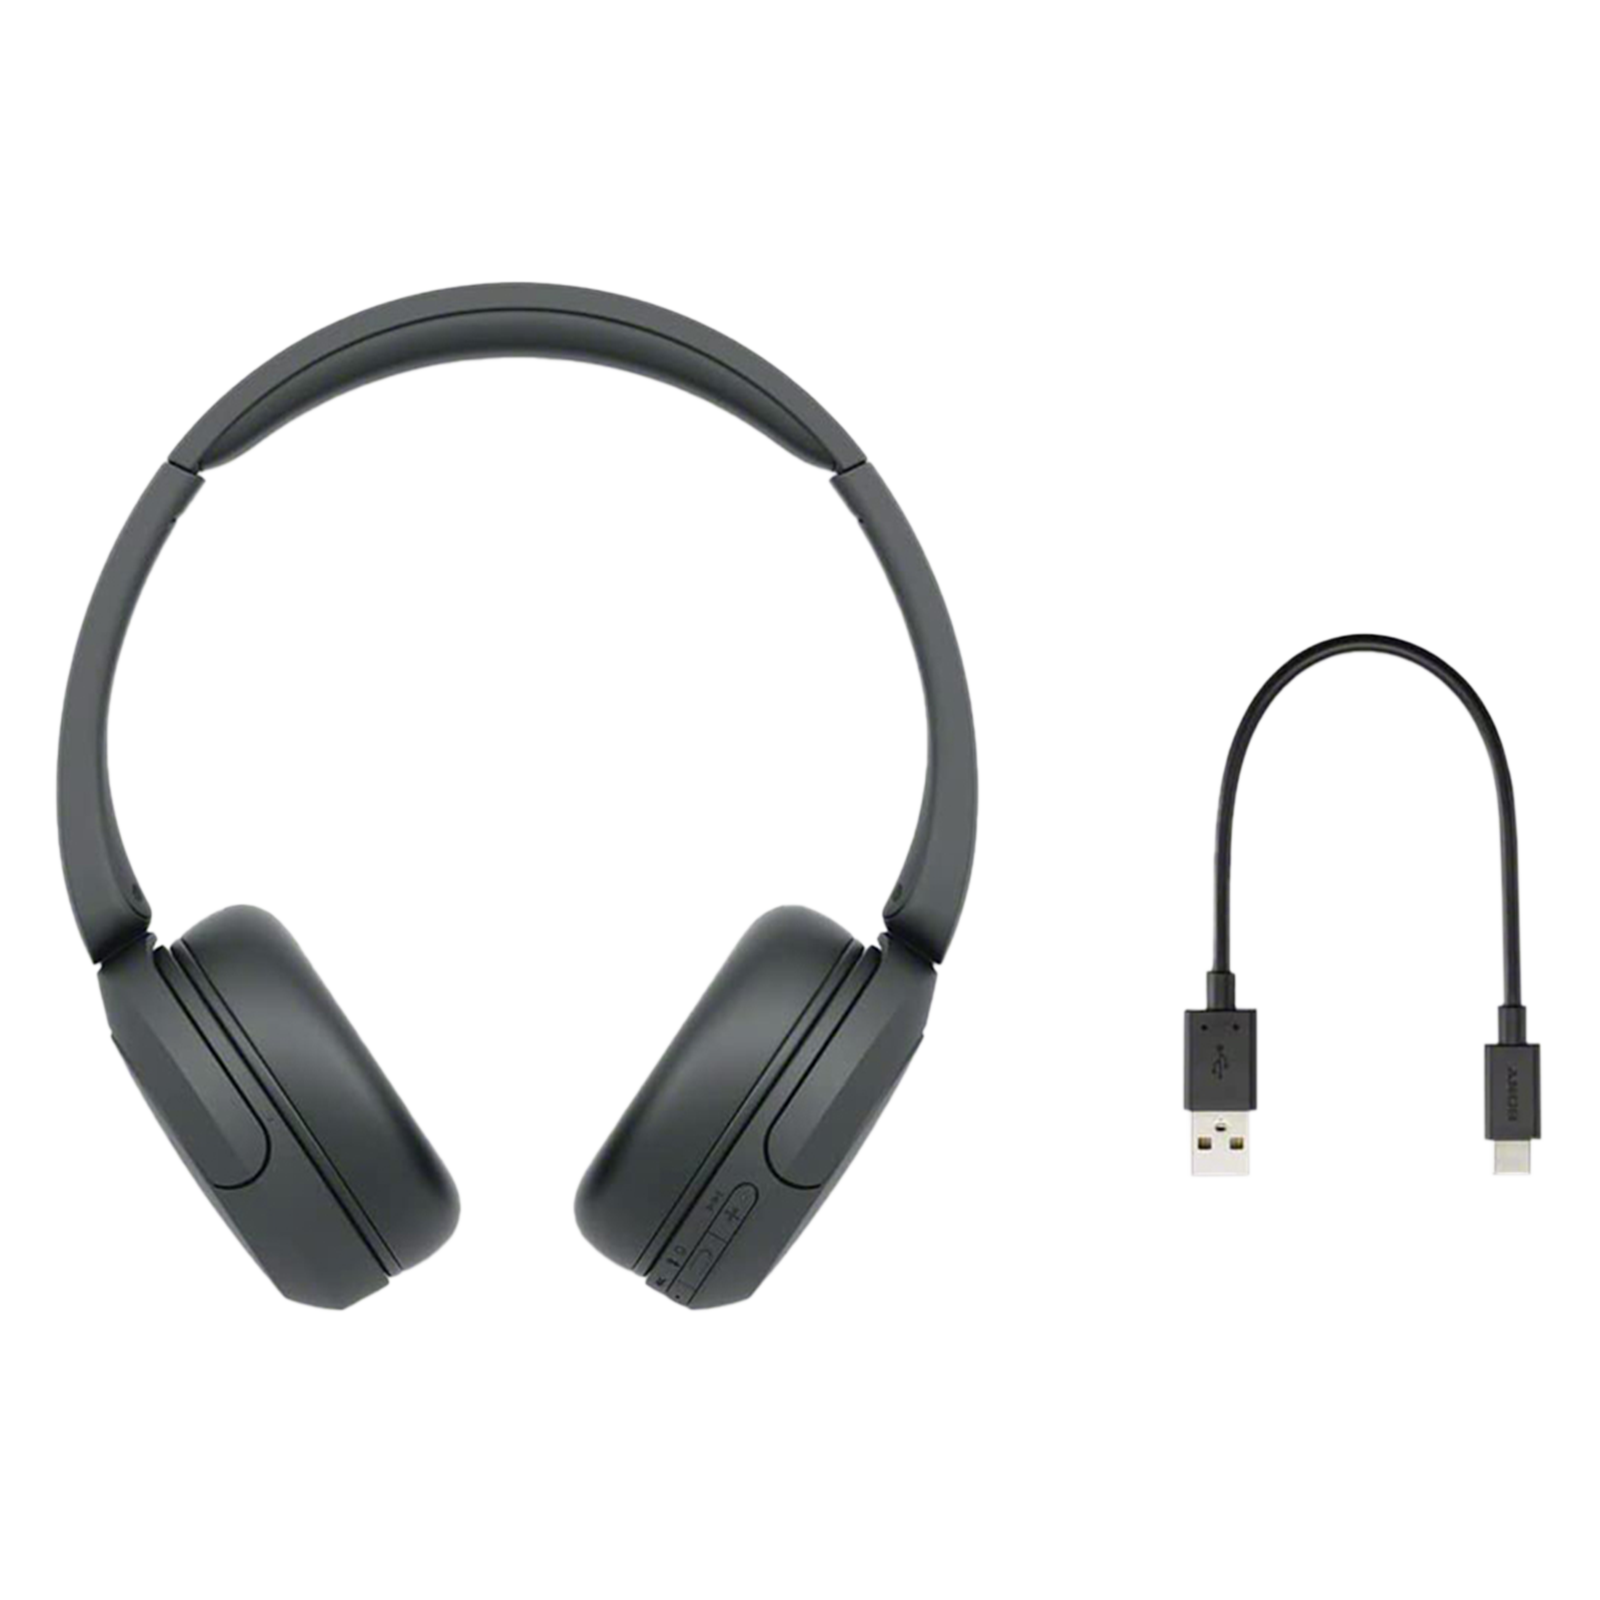 Sony Whch520/w Bluetooth Wireless Headphones With Microphone - White :  Target